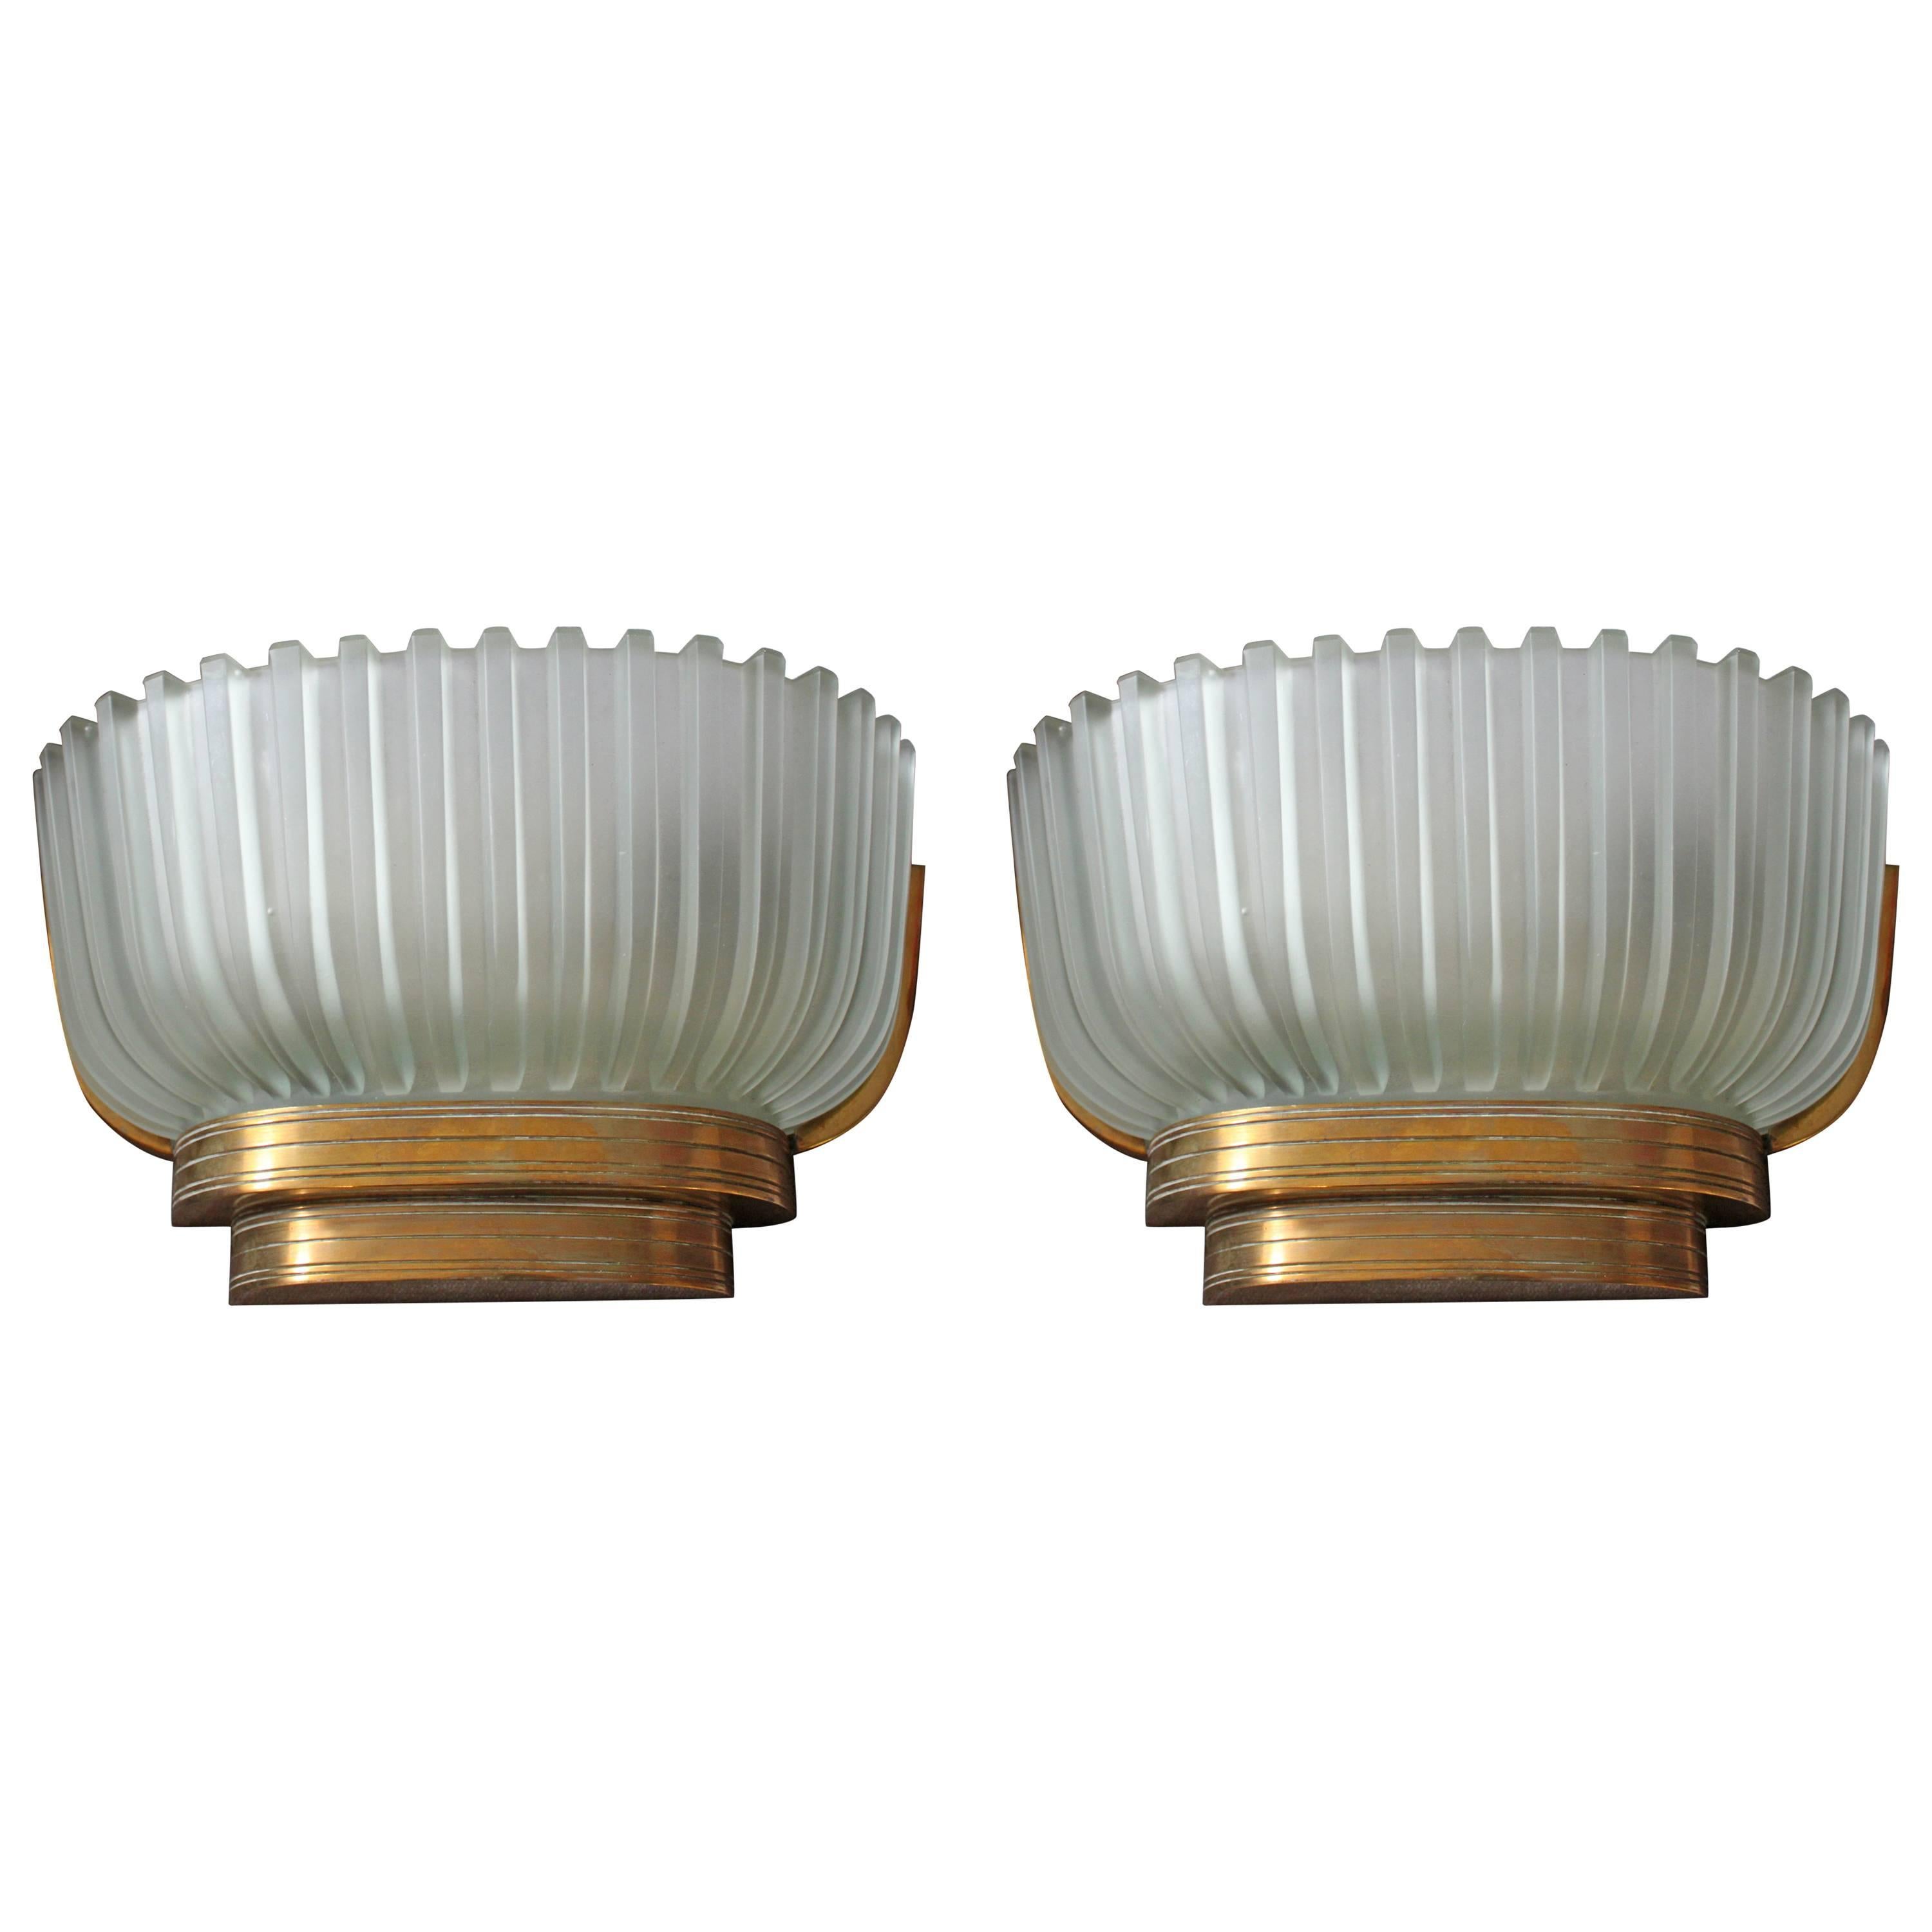 Pair of Glass and Brass Wall Lights, 1940s, Italian